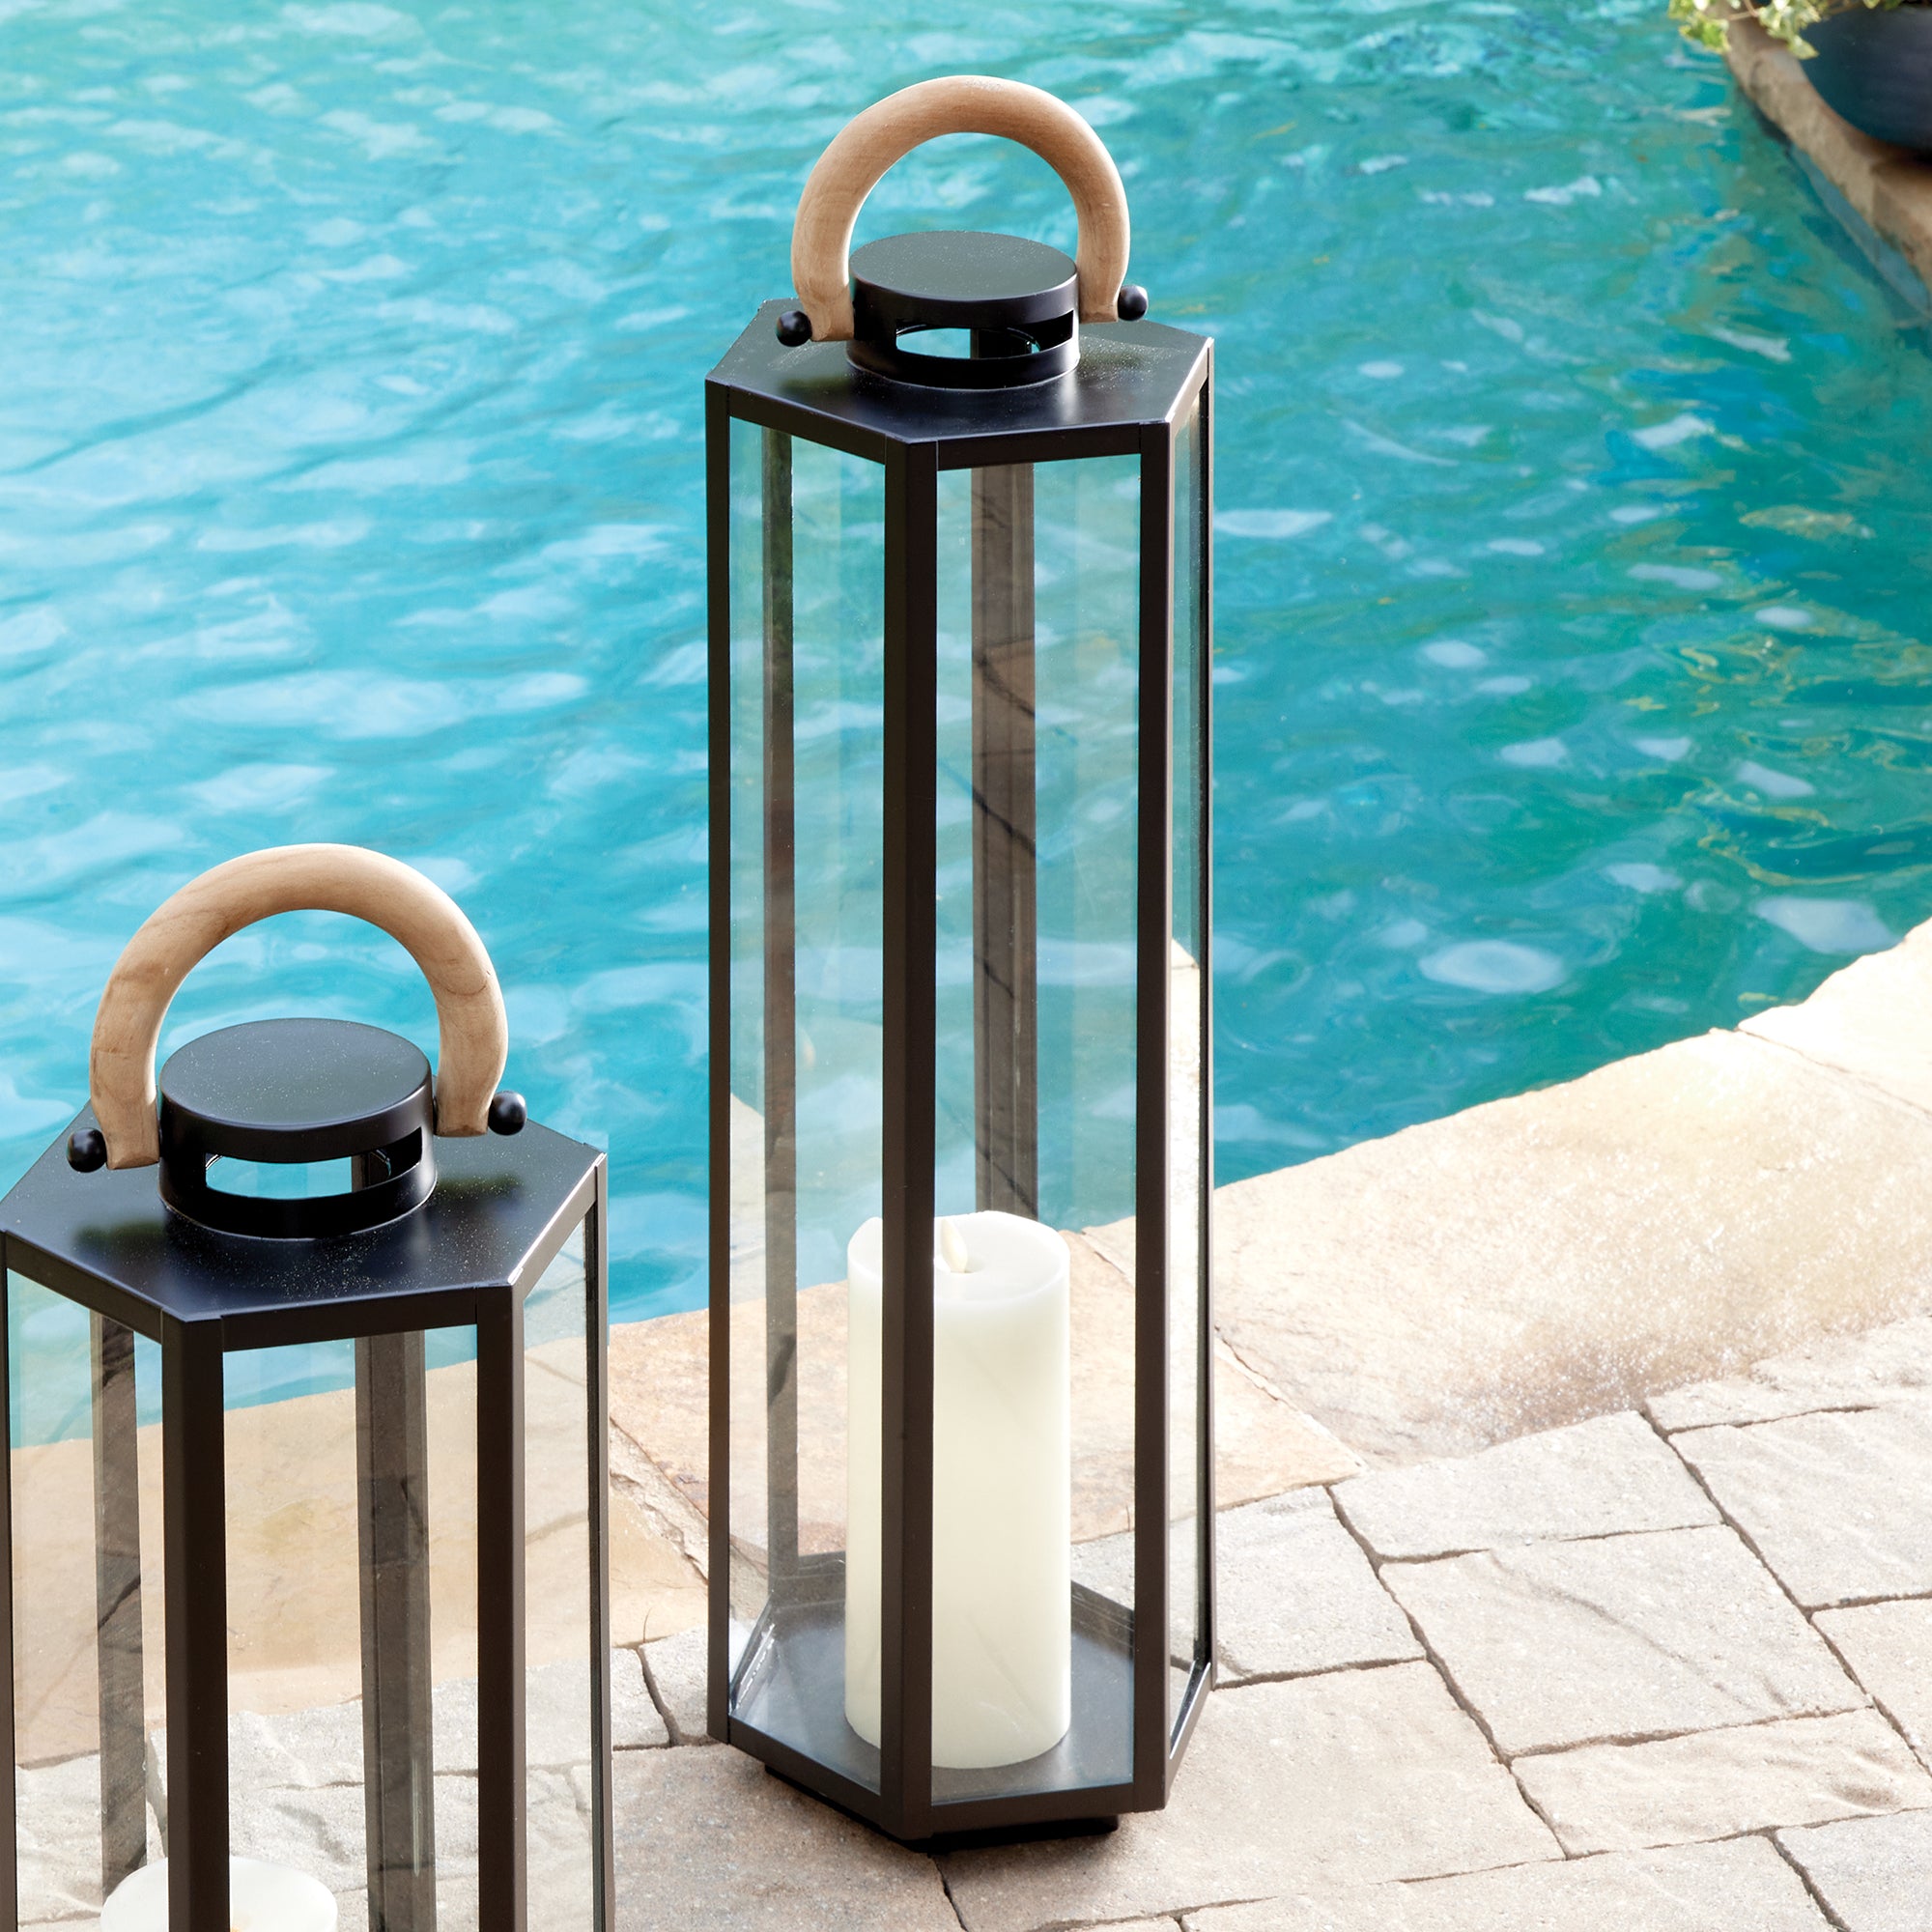 This matte black six panel lantern is made of iron and features a natural teak handle. Impressive in scale, it is a handsome outdoor accent by the pool, or at the front entry. Amethyst Home provides interior design, new construction, custom furniture, and area rugs in the Los Angeles metro area.